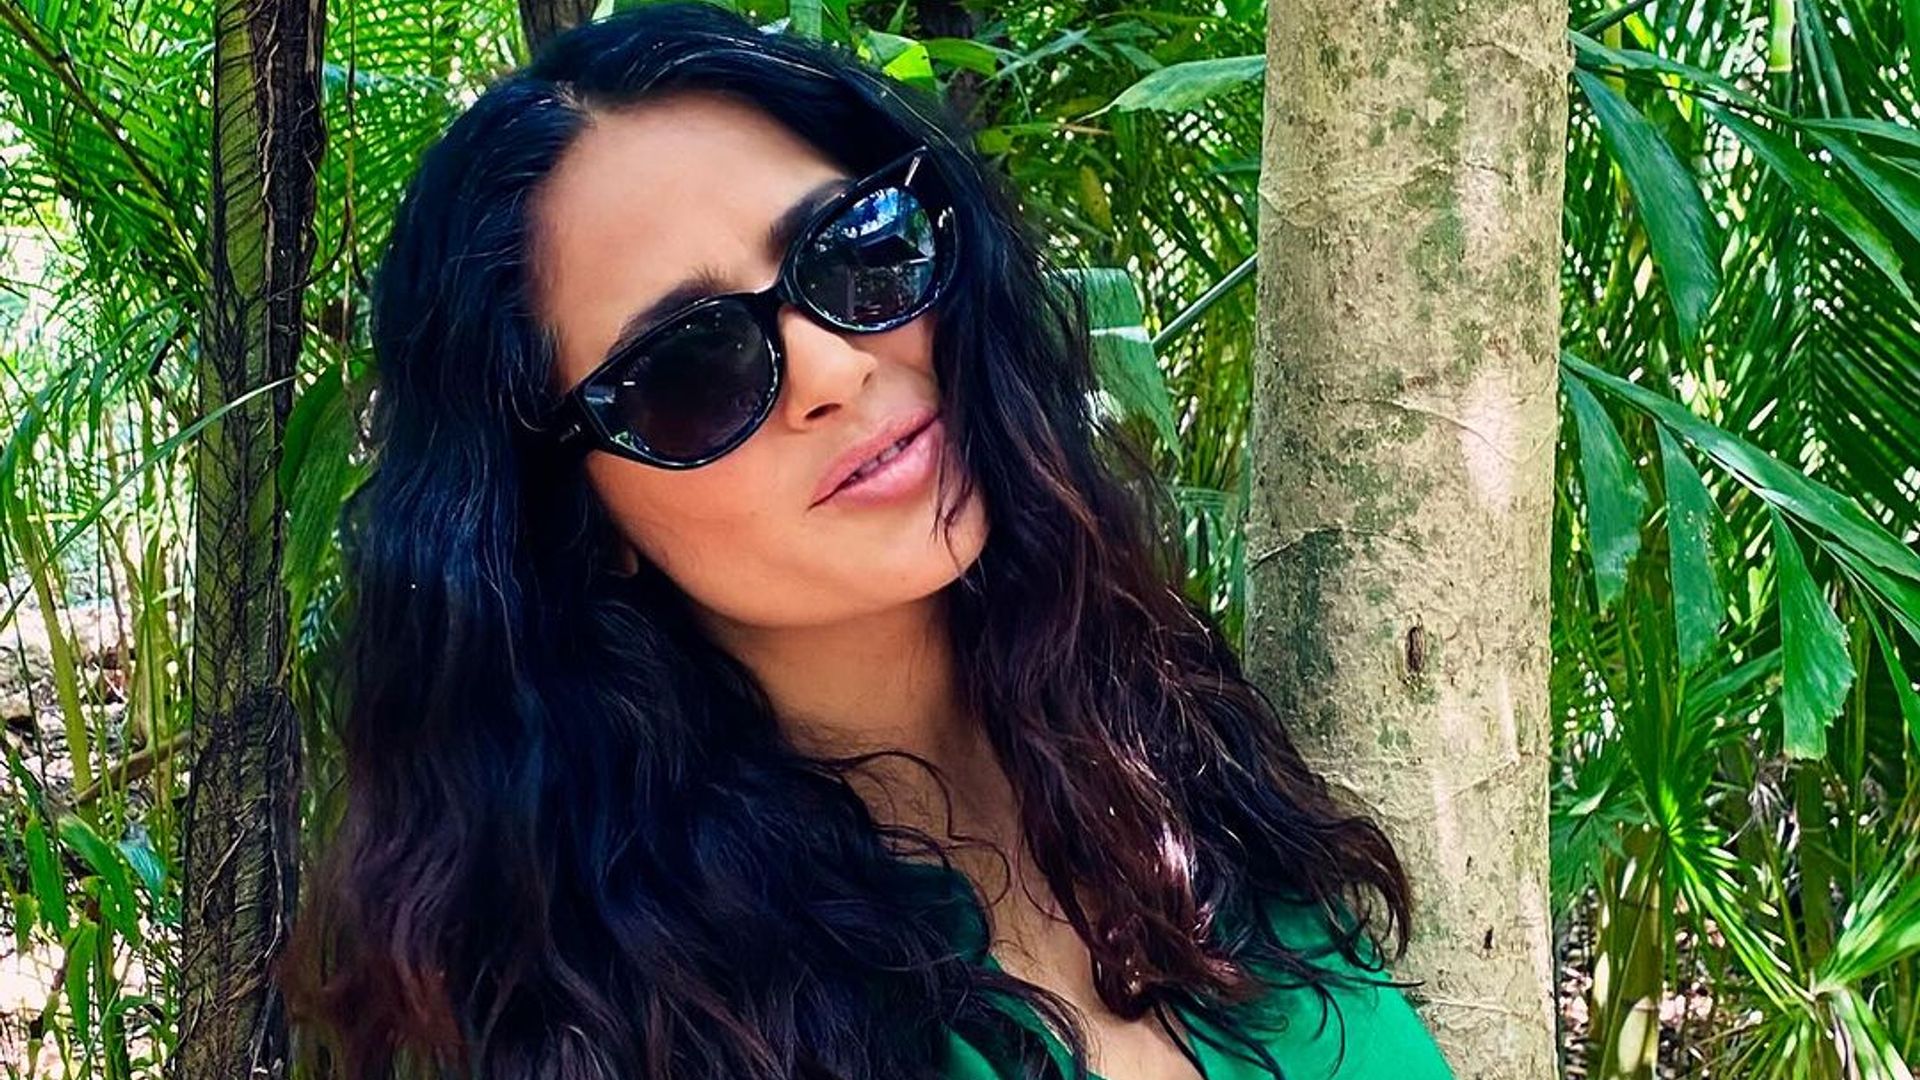 Salma Hayek hugs a tree as she joins the celebrities honoring Earth Day